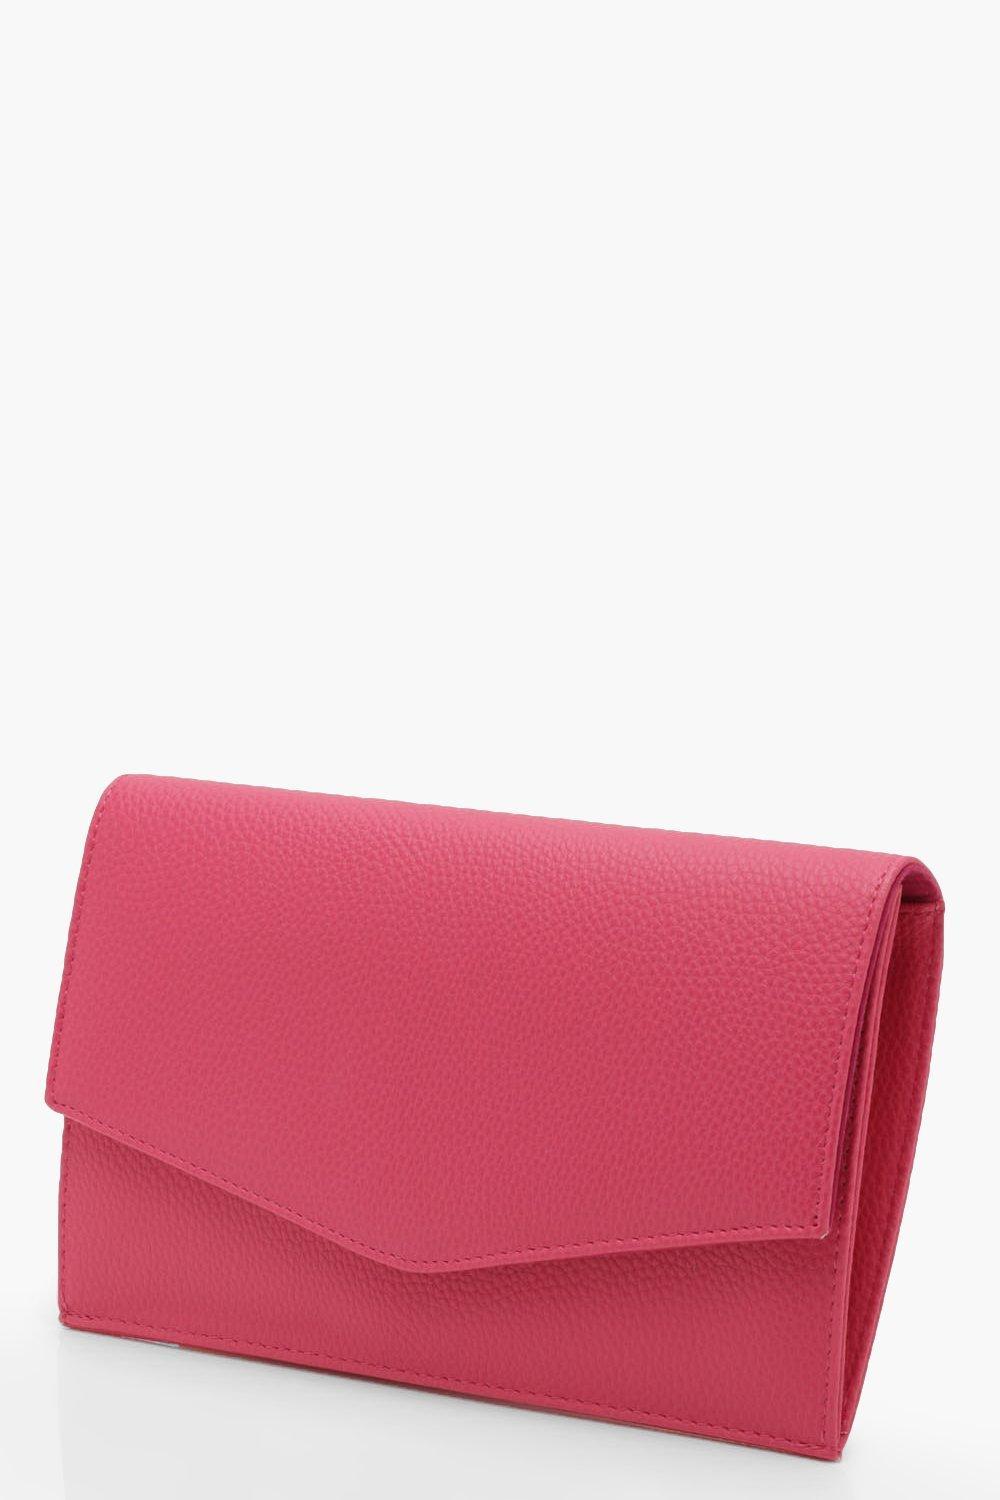 Lyst - Boohoo Grainy Pu Envelope Clutch And Chain in Pink